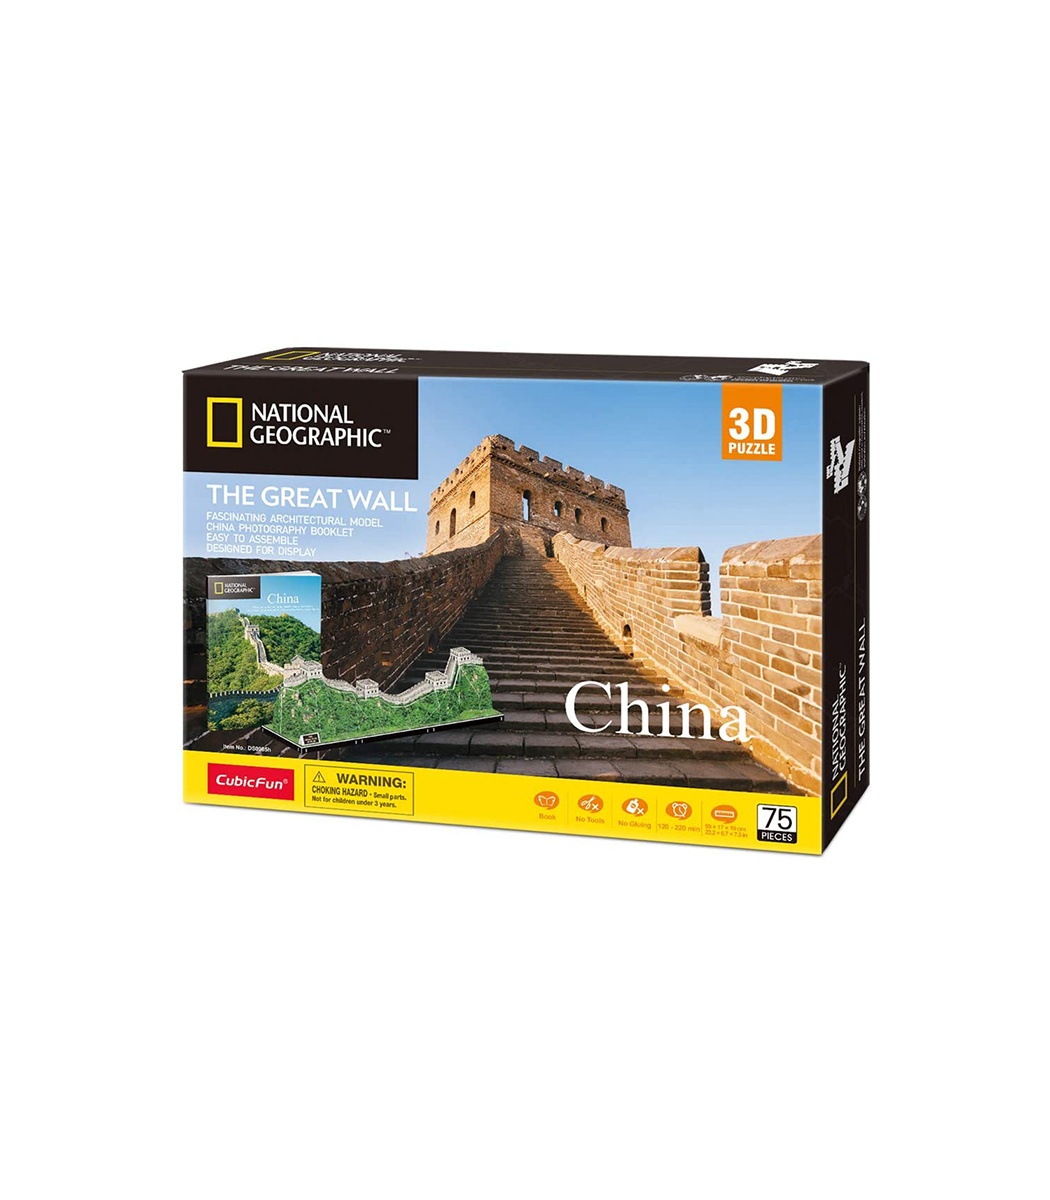 Cubic Fun 3D Puzzle Great Wall Chinesische Mauer China Groß 